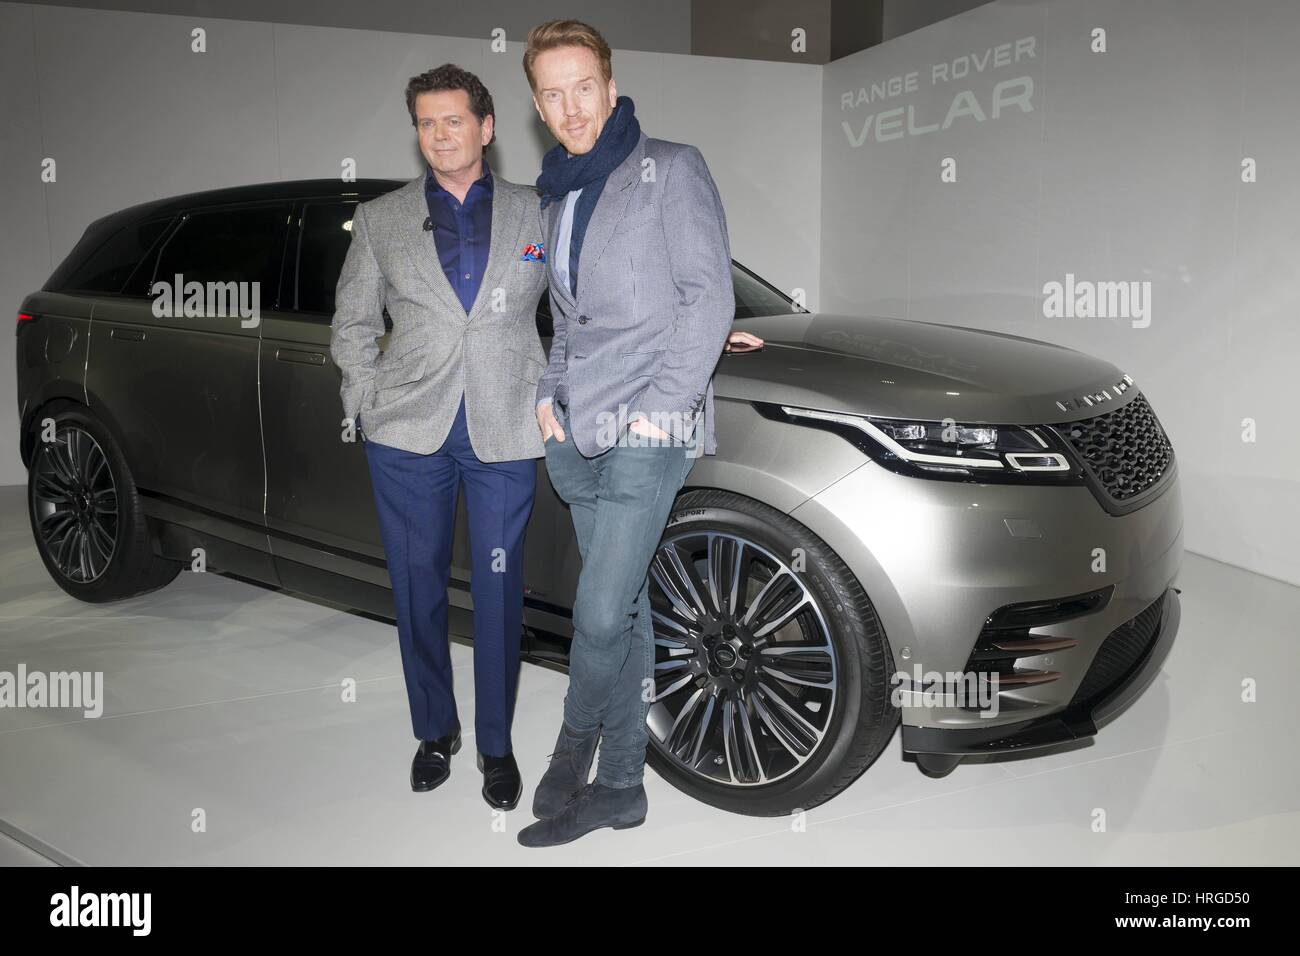 London, United Kingdom Of Great Britain And Northern Ireland. 01st Mar, 2017. Damian Lewis and Gerry McGovern at Range Rover Velar World Premiere in the London Design Museum. London, UK. 02/03/2017 | usage worldwide Credit: dpa/Alamy Live News Stock Photo